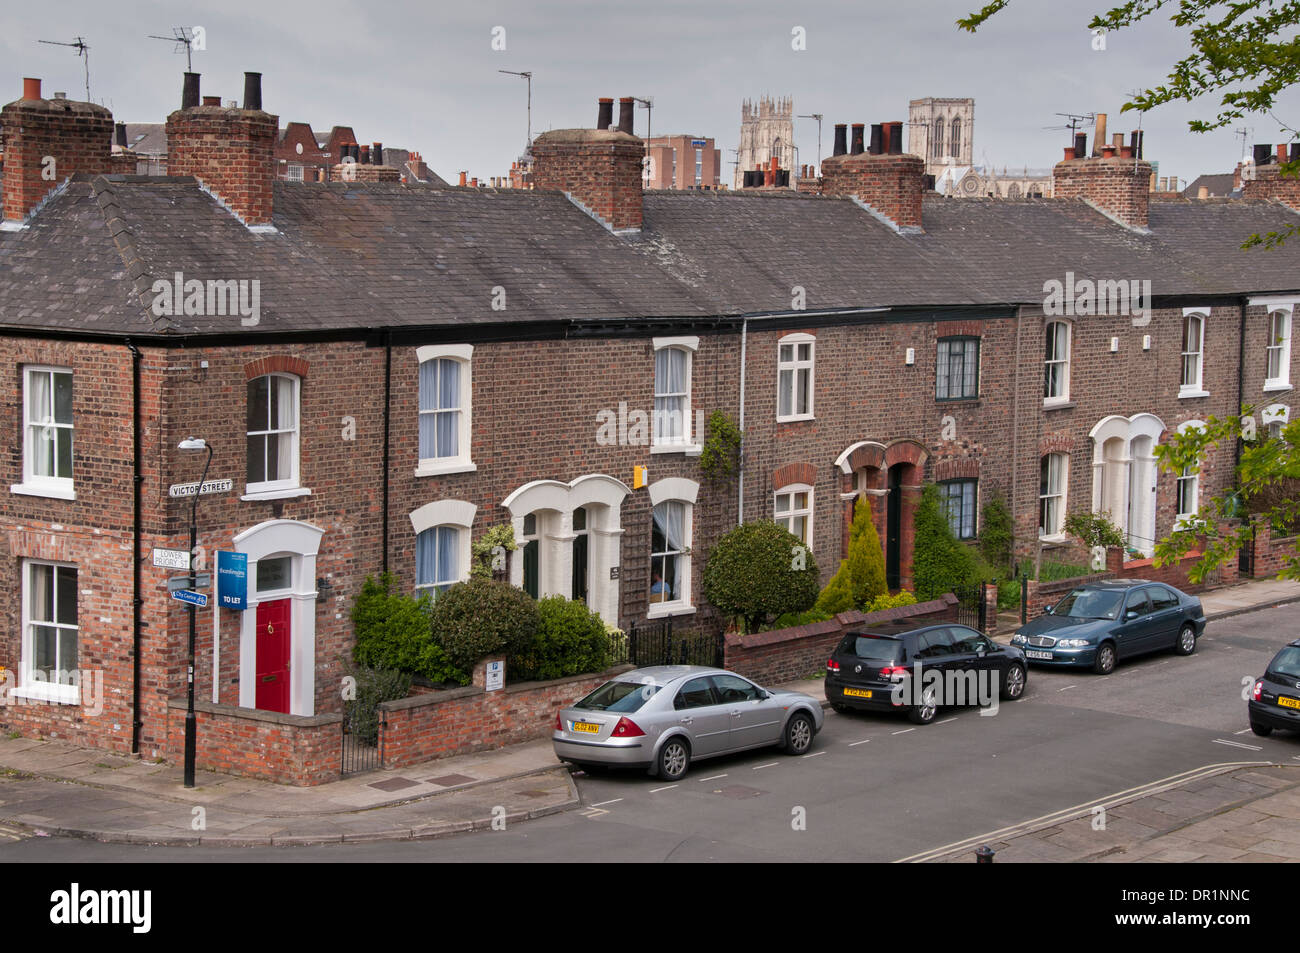 High view over row of small attractive red brick Victorian terraced houses (cottages) on Victor Street (Minster beyond) - York, Yorkshire, England, UK Stock Photo